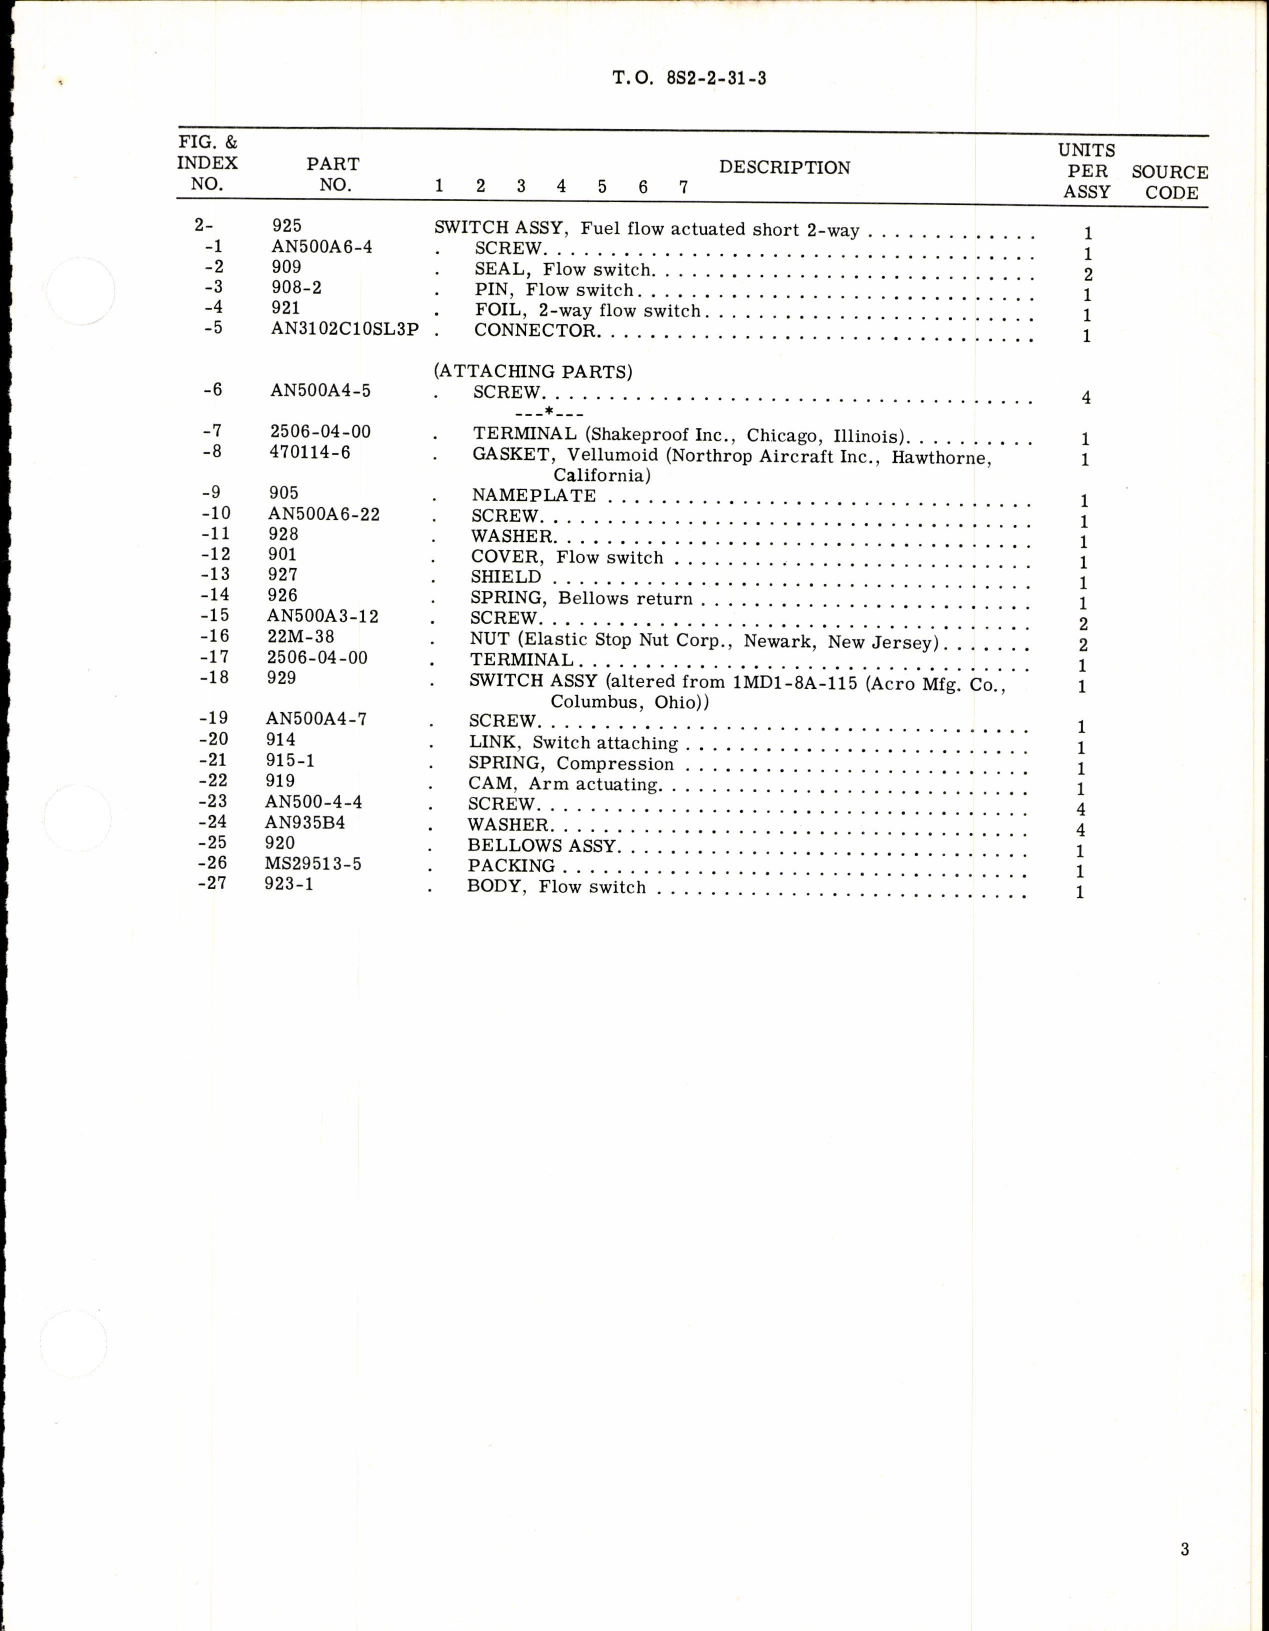 Sample page 3 from AirCorps Library document: Fuel Flow Actuated Short 2-Way Switch Part No 925